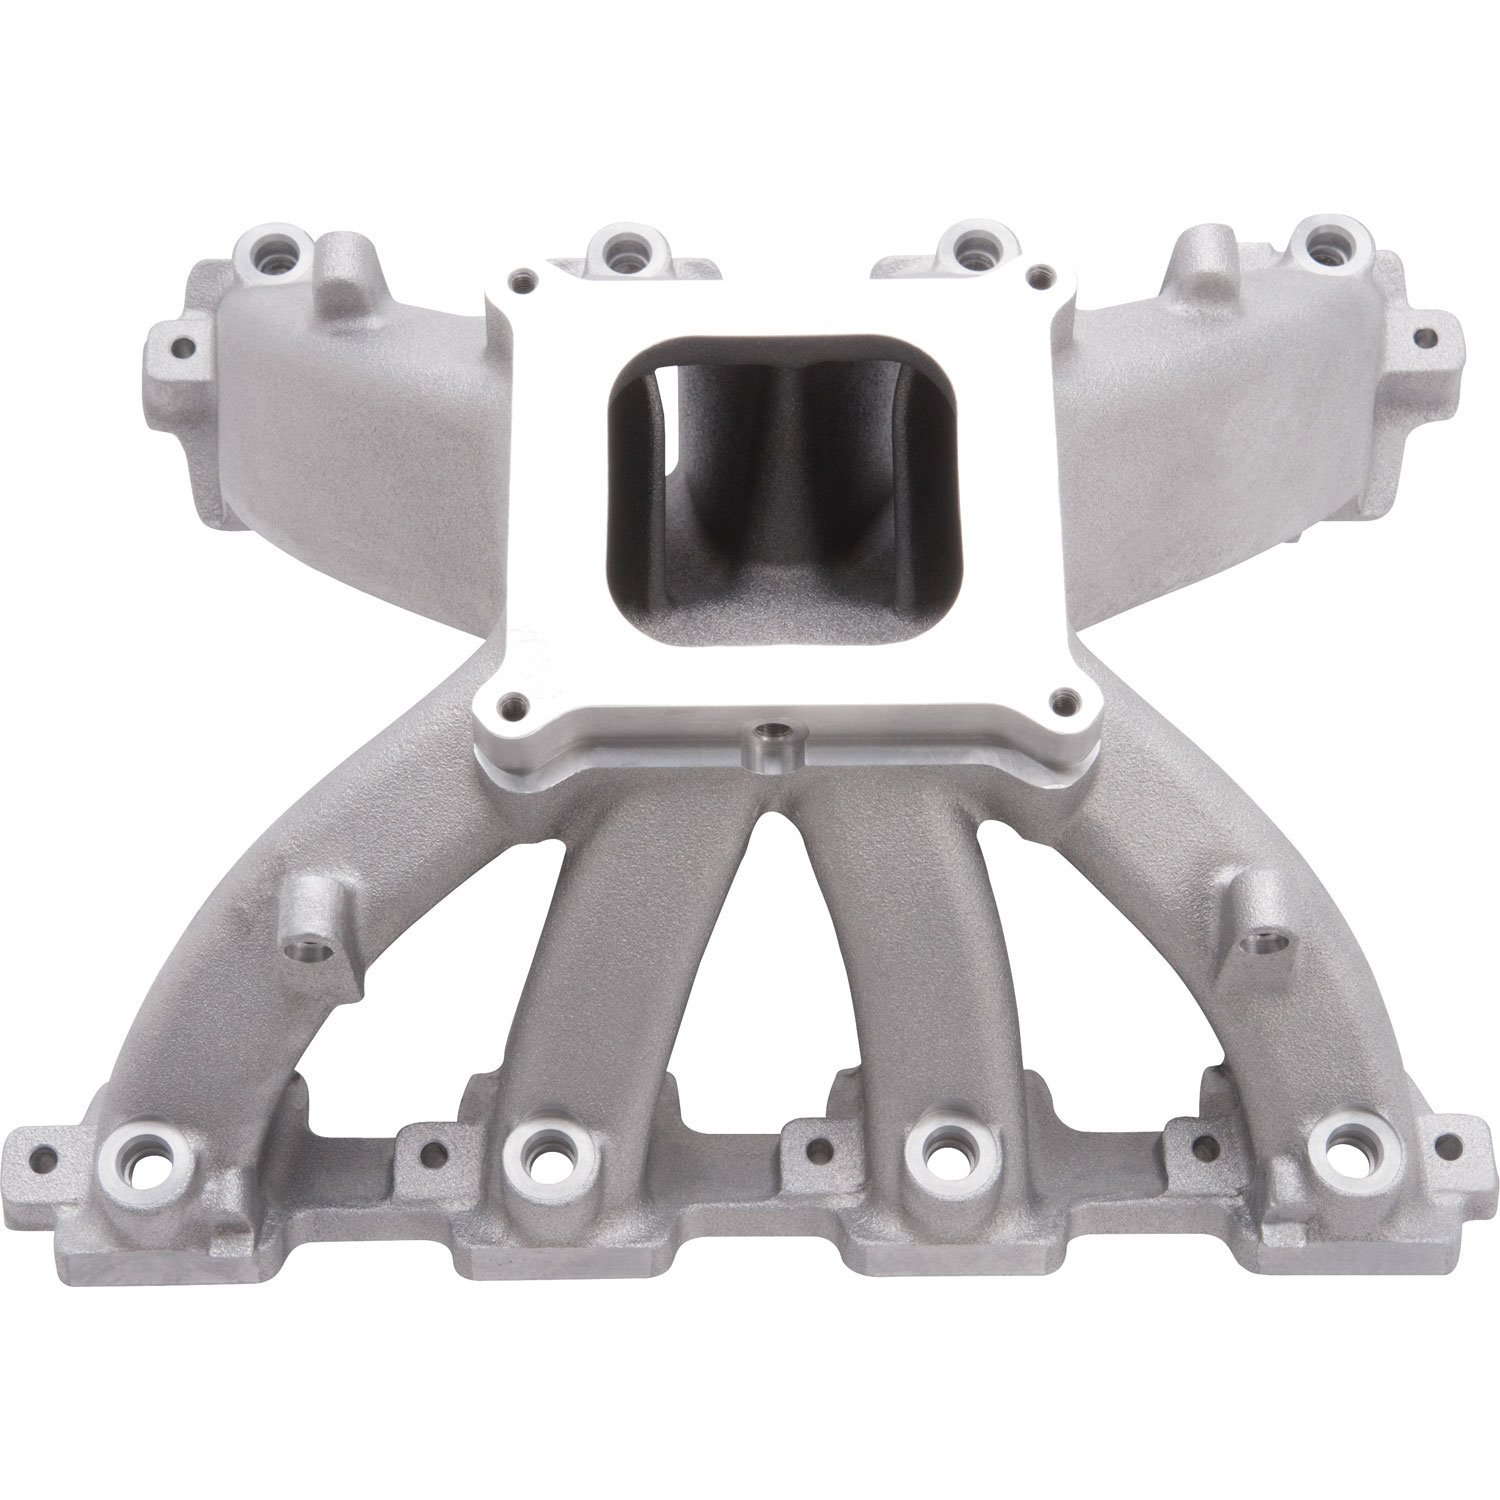 Super Victor LS7 EFI Intake Manifold Chevy LS with LS7 Cylinder Heads